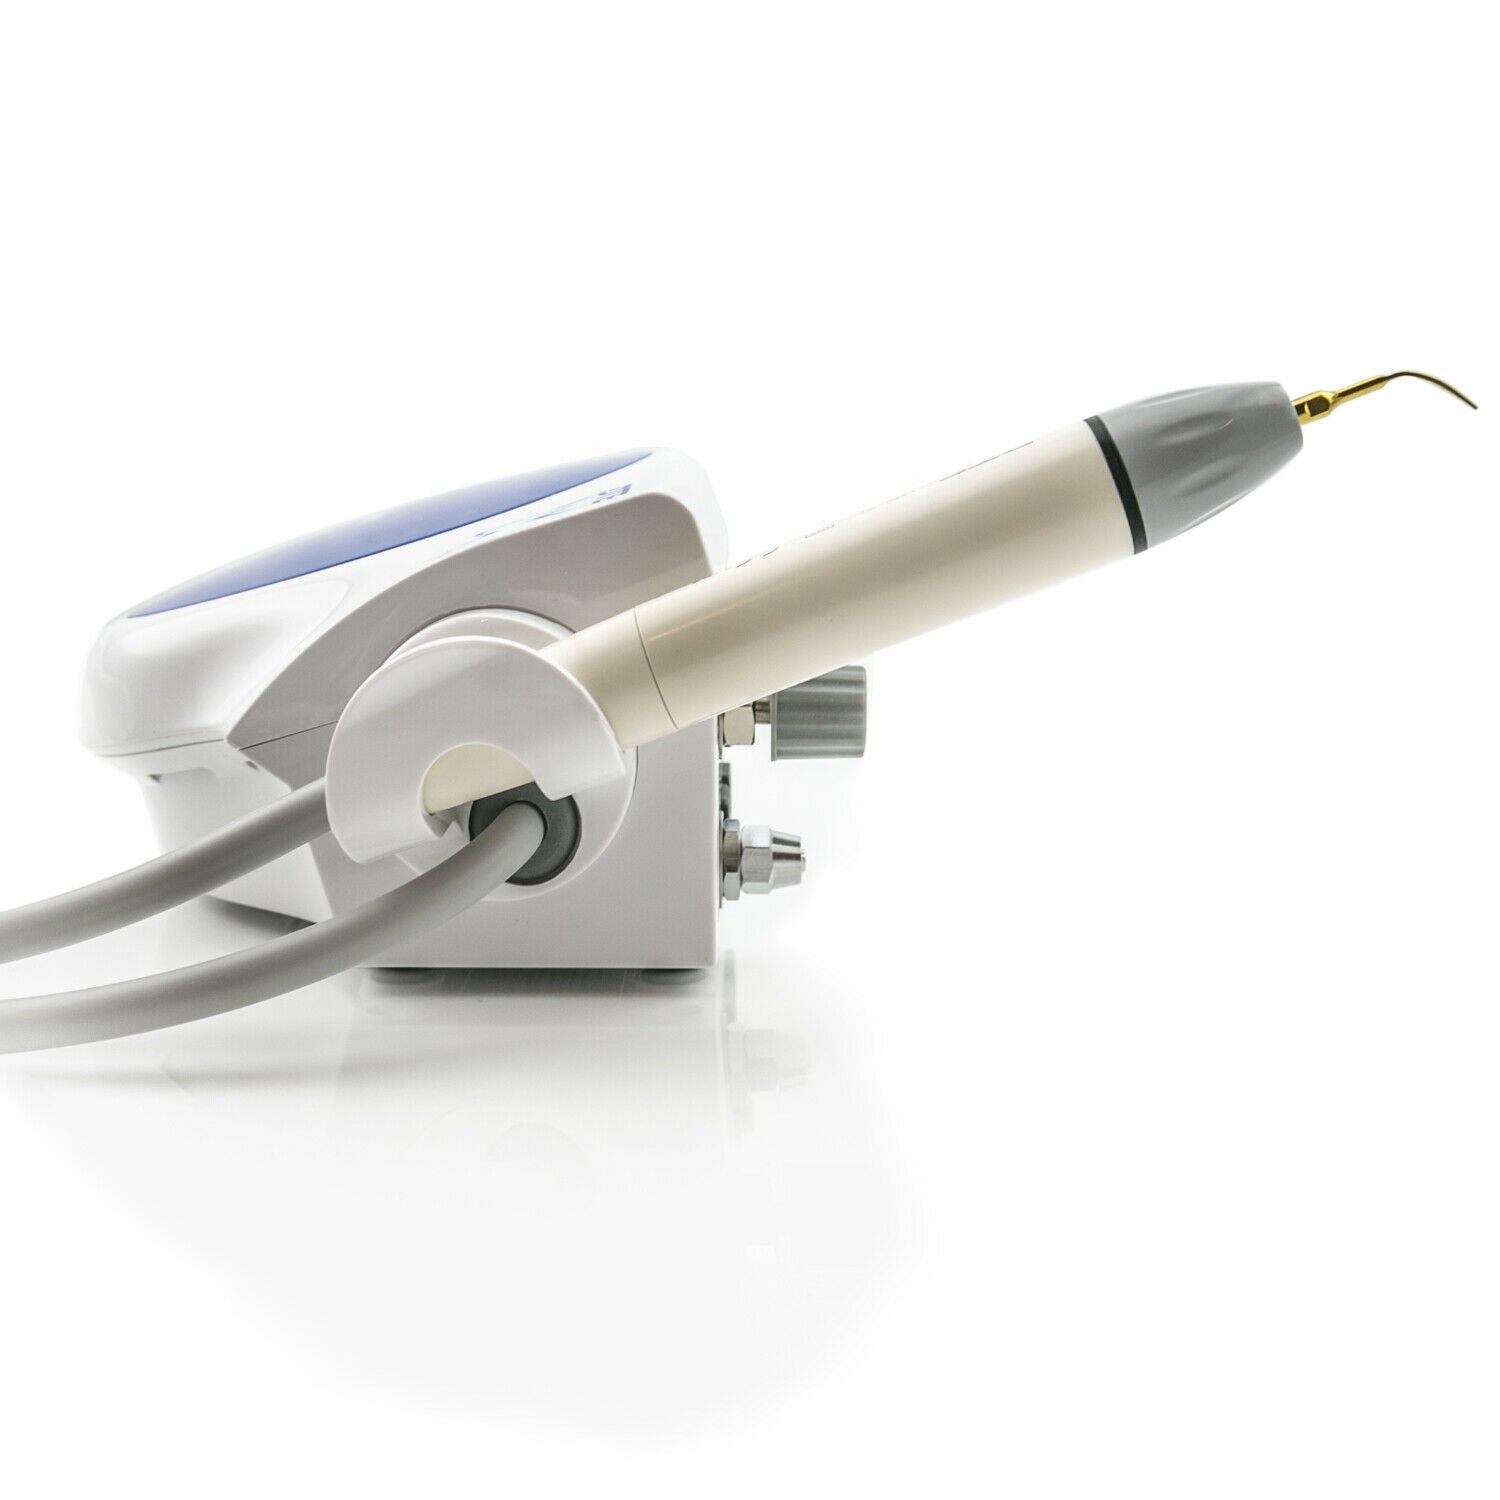 DTE D5 with LED  Woodpecker Ultrasonic Scaler Scaling Perio Endo on sale